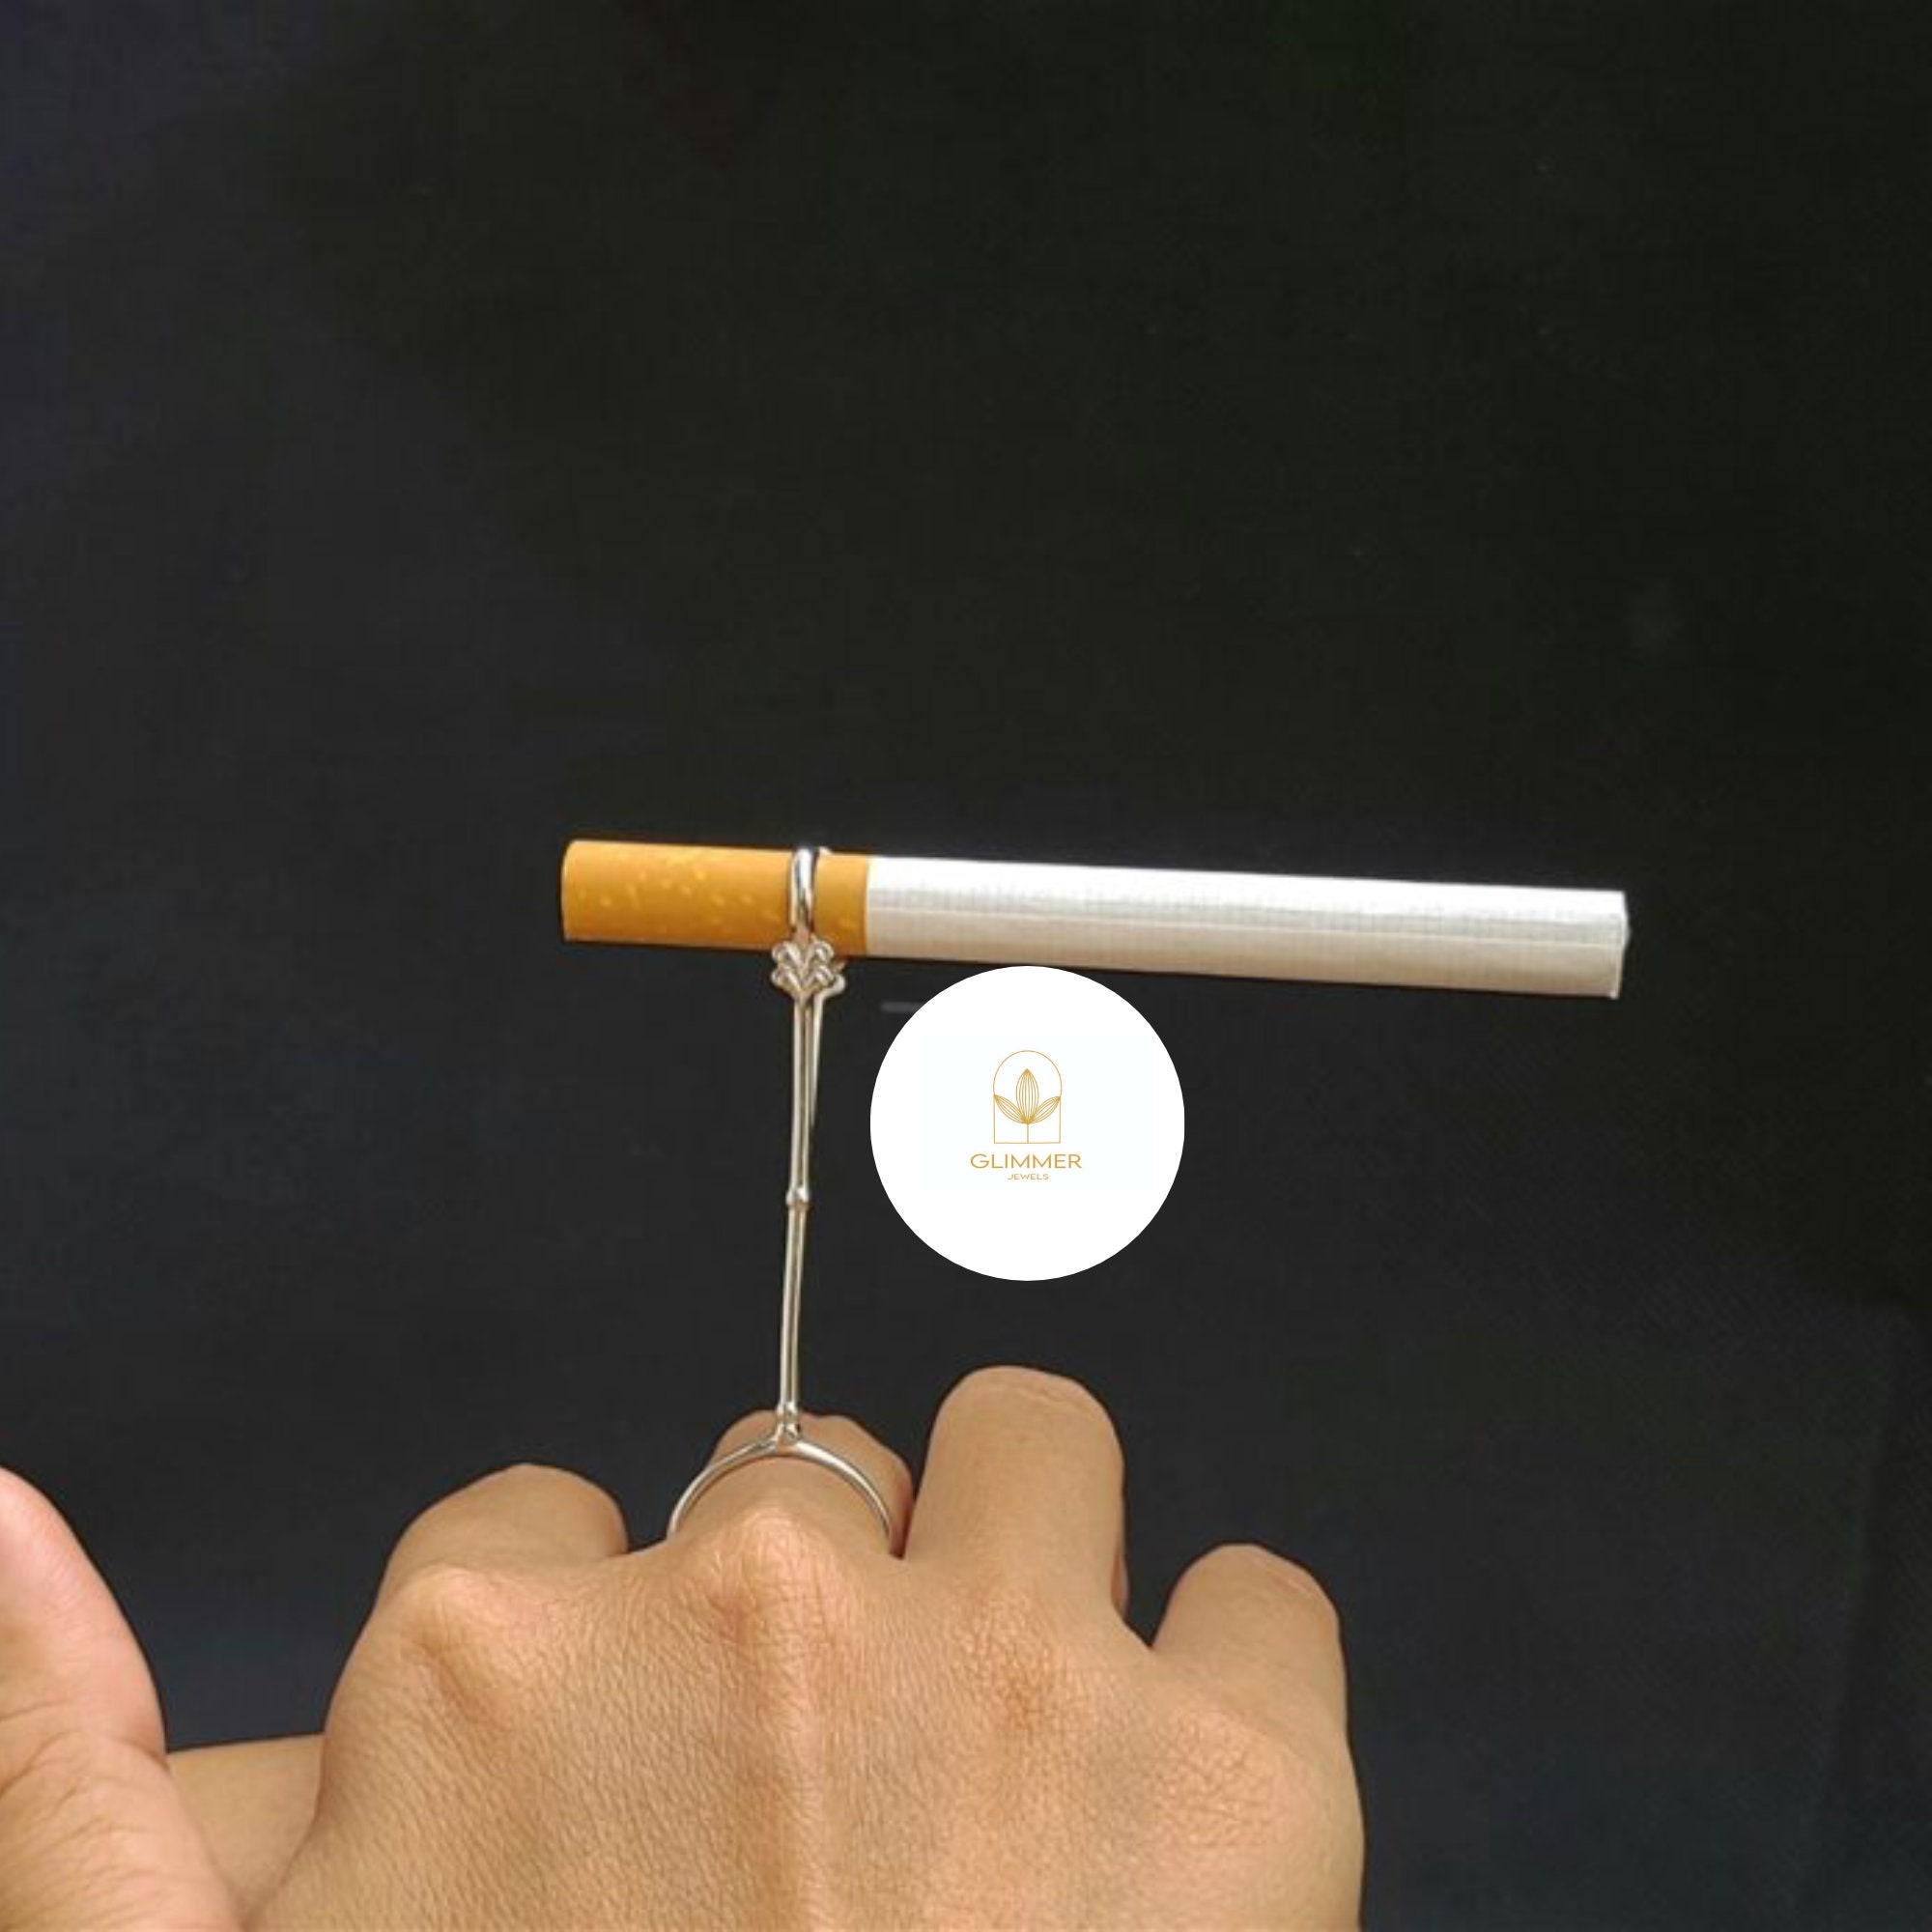 Cigarette Holder Ring, Smoking Accessories